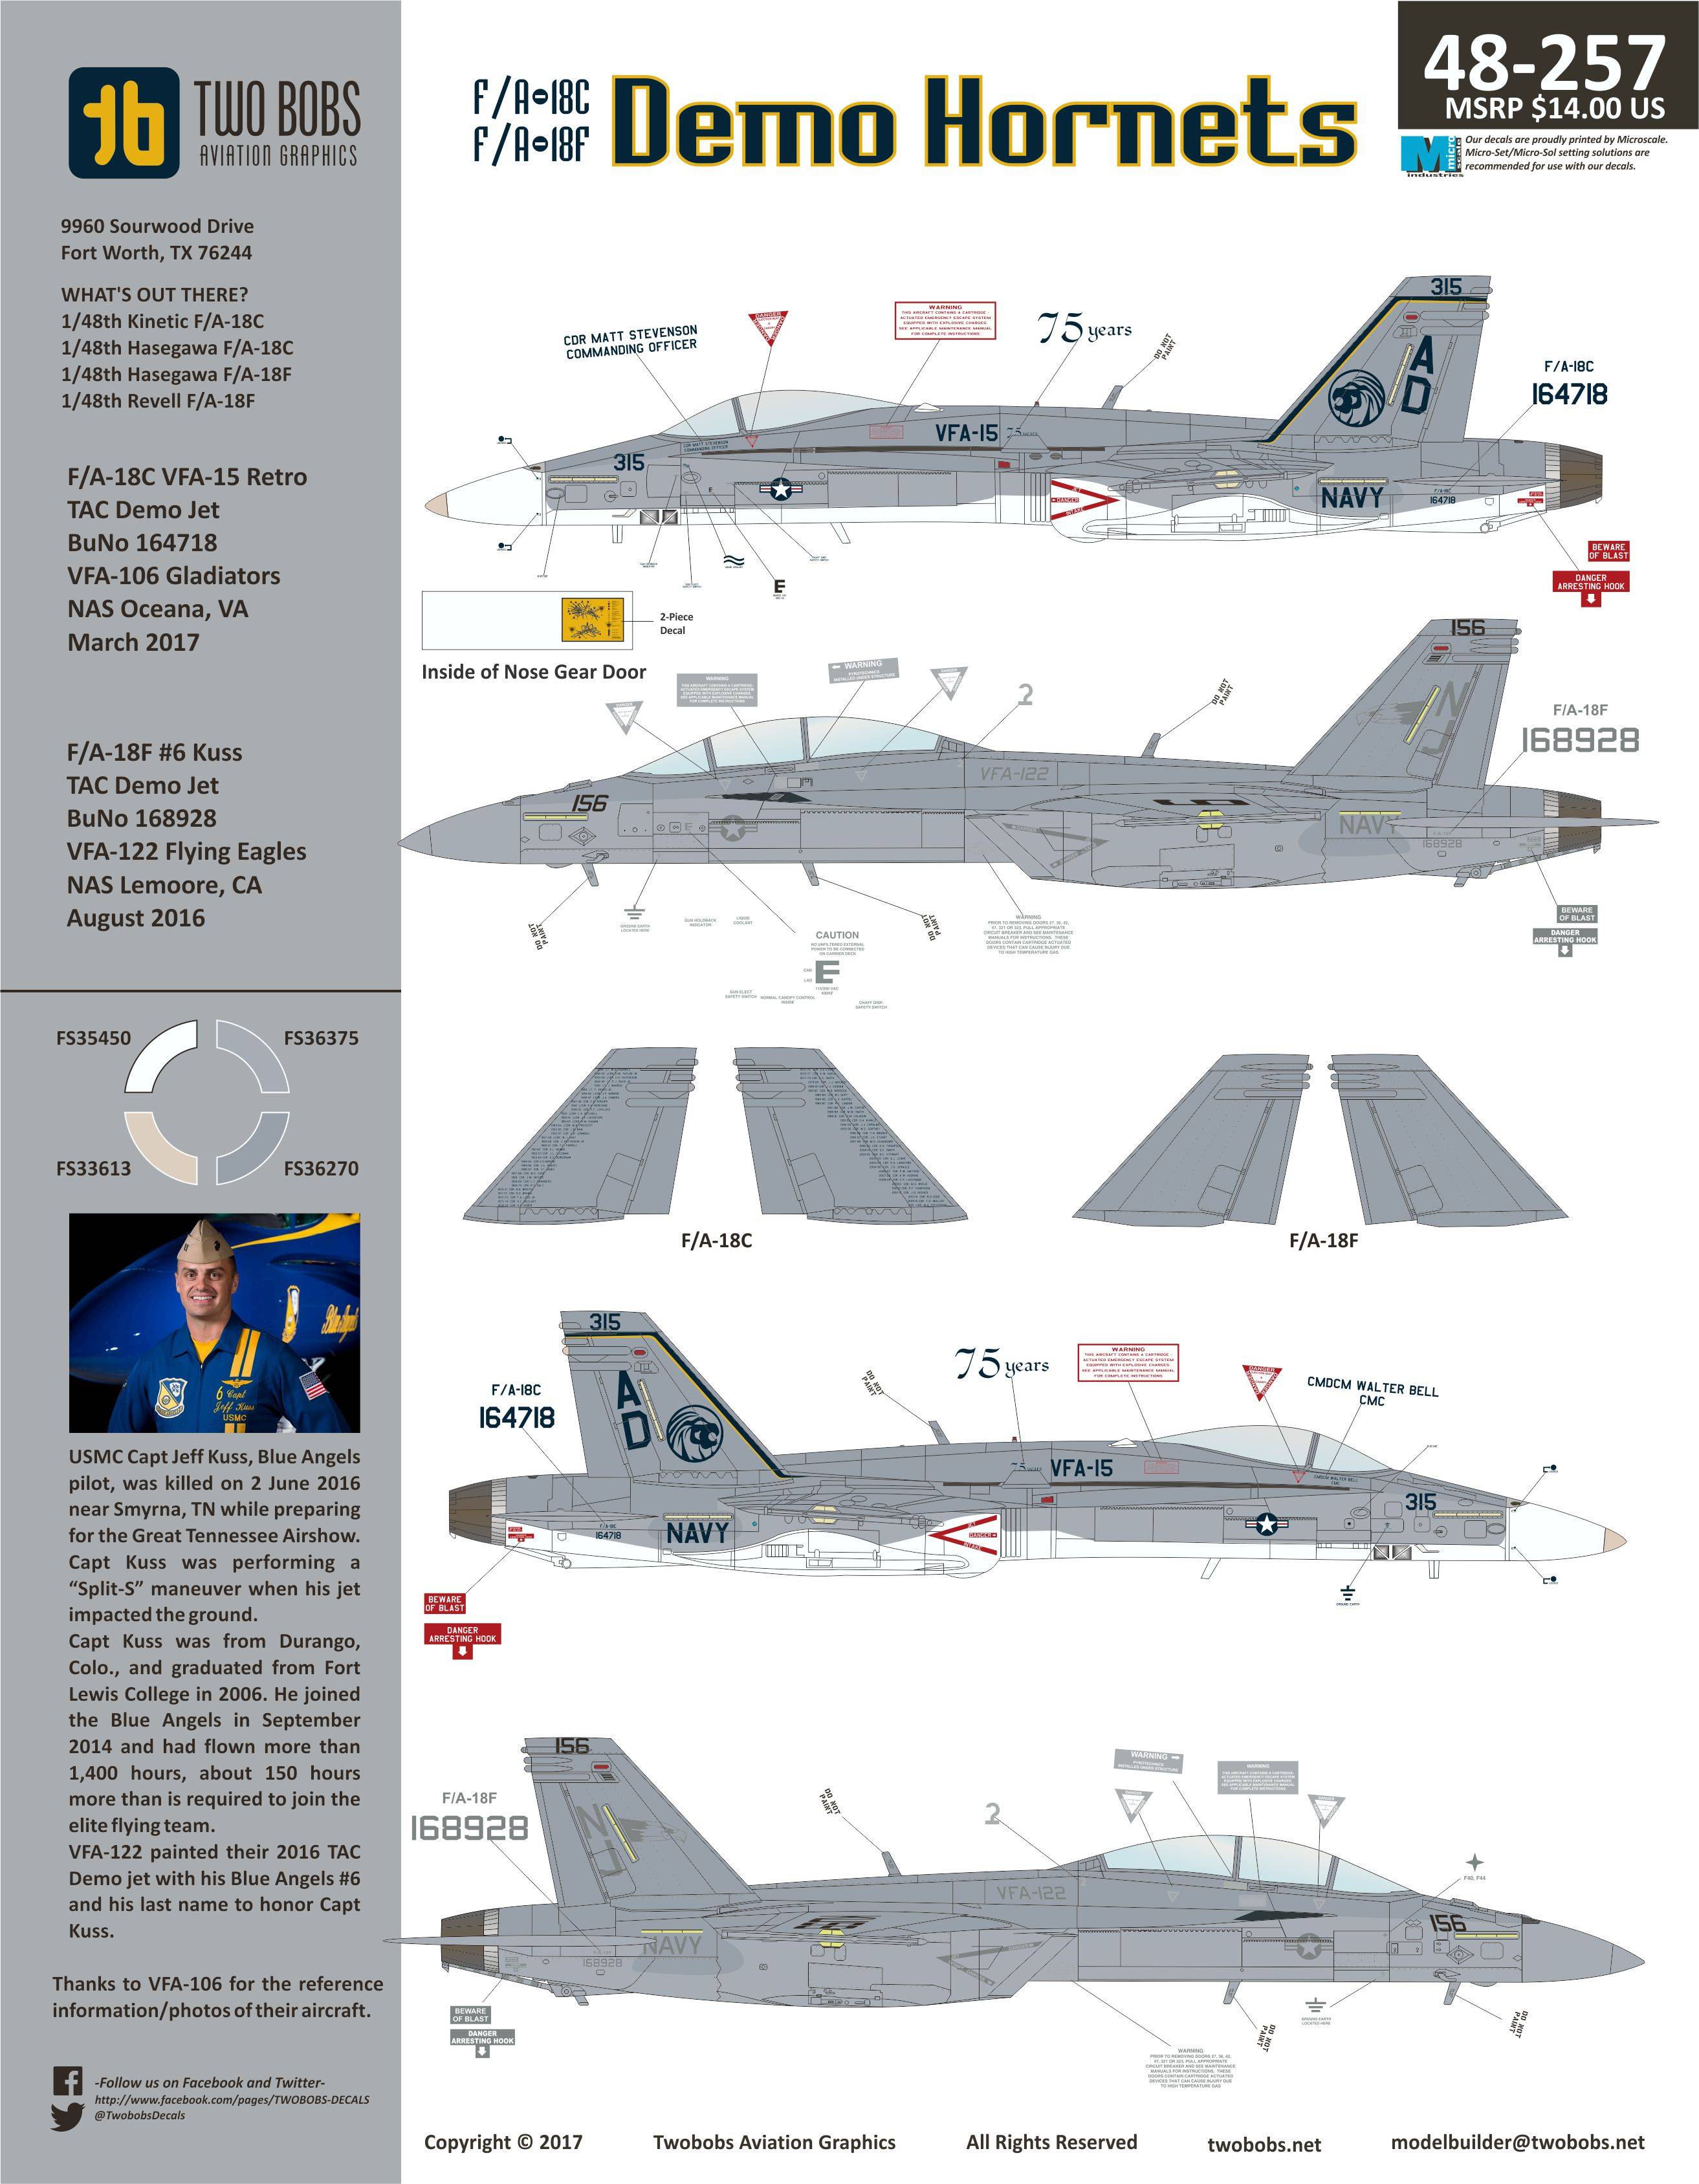 Accessoires - Décal Boeing F / A-18C-F / A-18F Demo frelons- 1/48 -Two